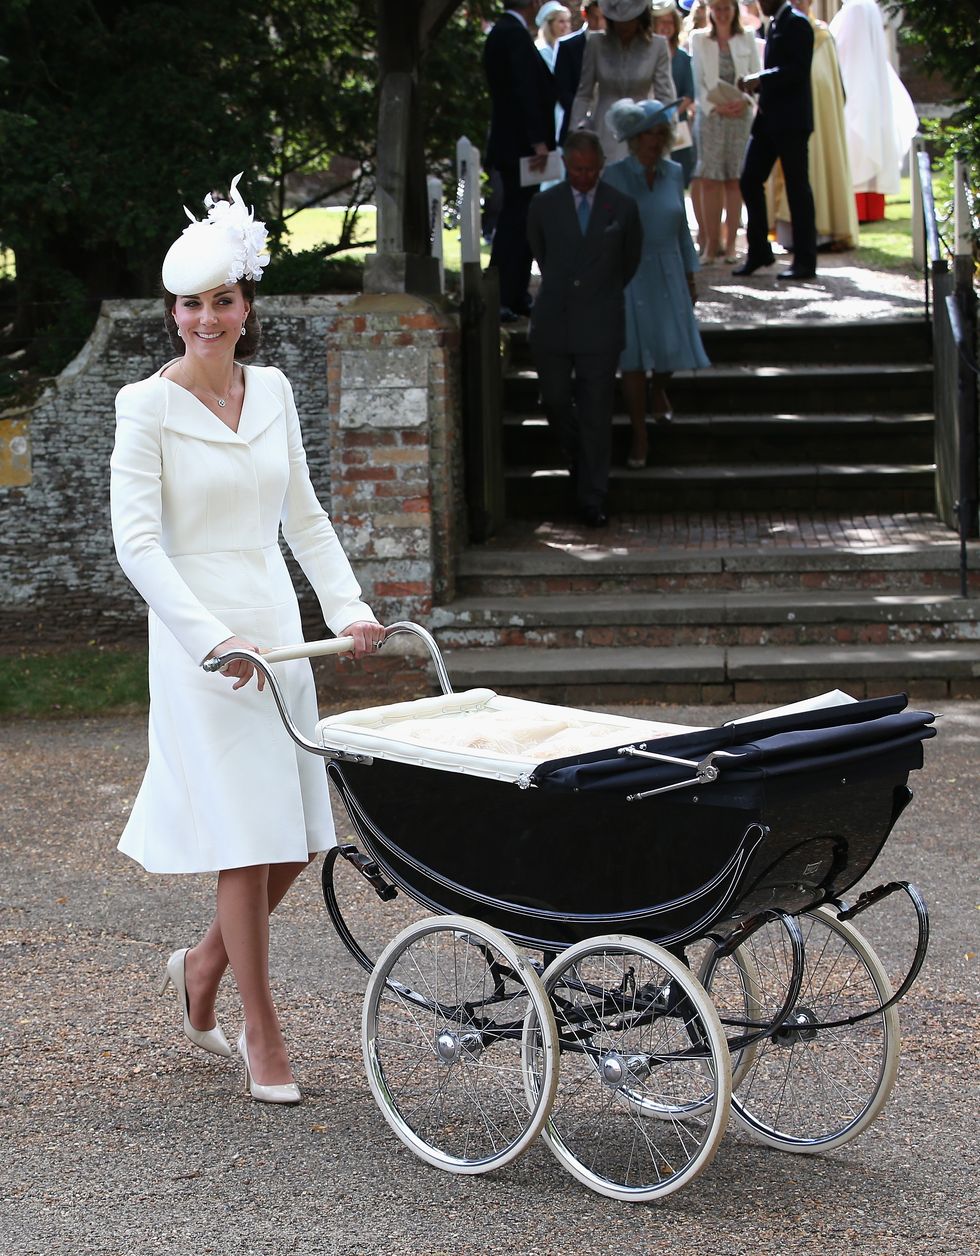 KING'S LYNN, ENGLAND - JULY 05:  Catherine, Duchess of Cambridge pushes  Princess Charlotte of Cambridge in her pram they leave the Church of St Mary Magdalene on the Sandringham Estate for the Christening of Princess Charlotte of Cambridge on July 5, 2015 in King's Lynn, England.  (Photo by Chris Jackson/Getty Images)